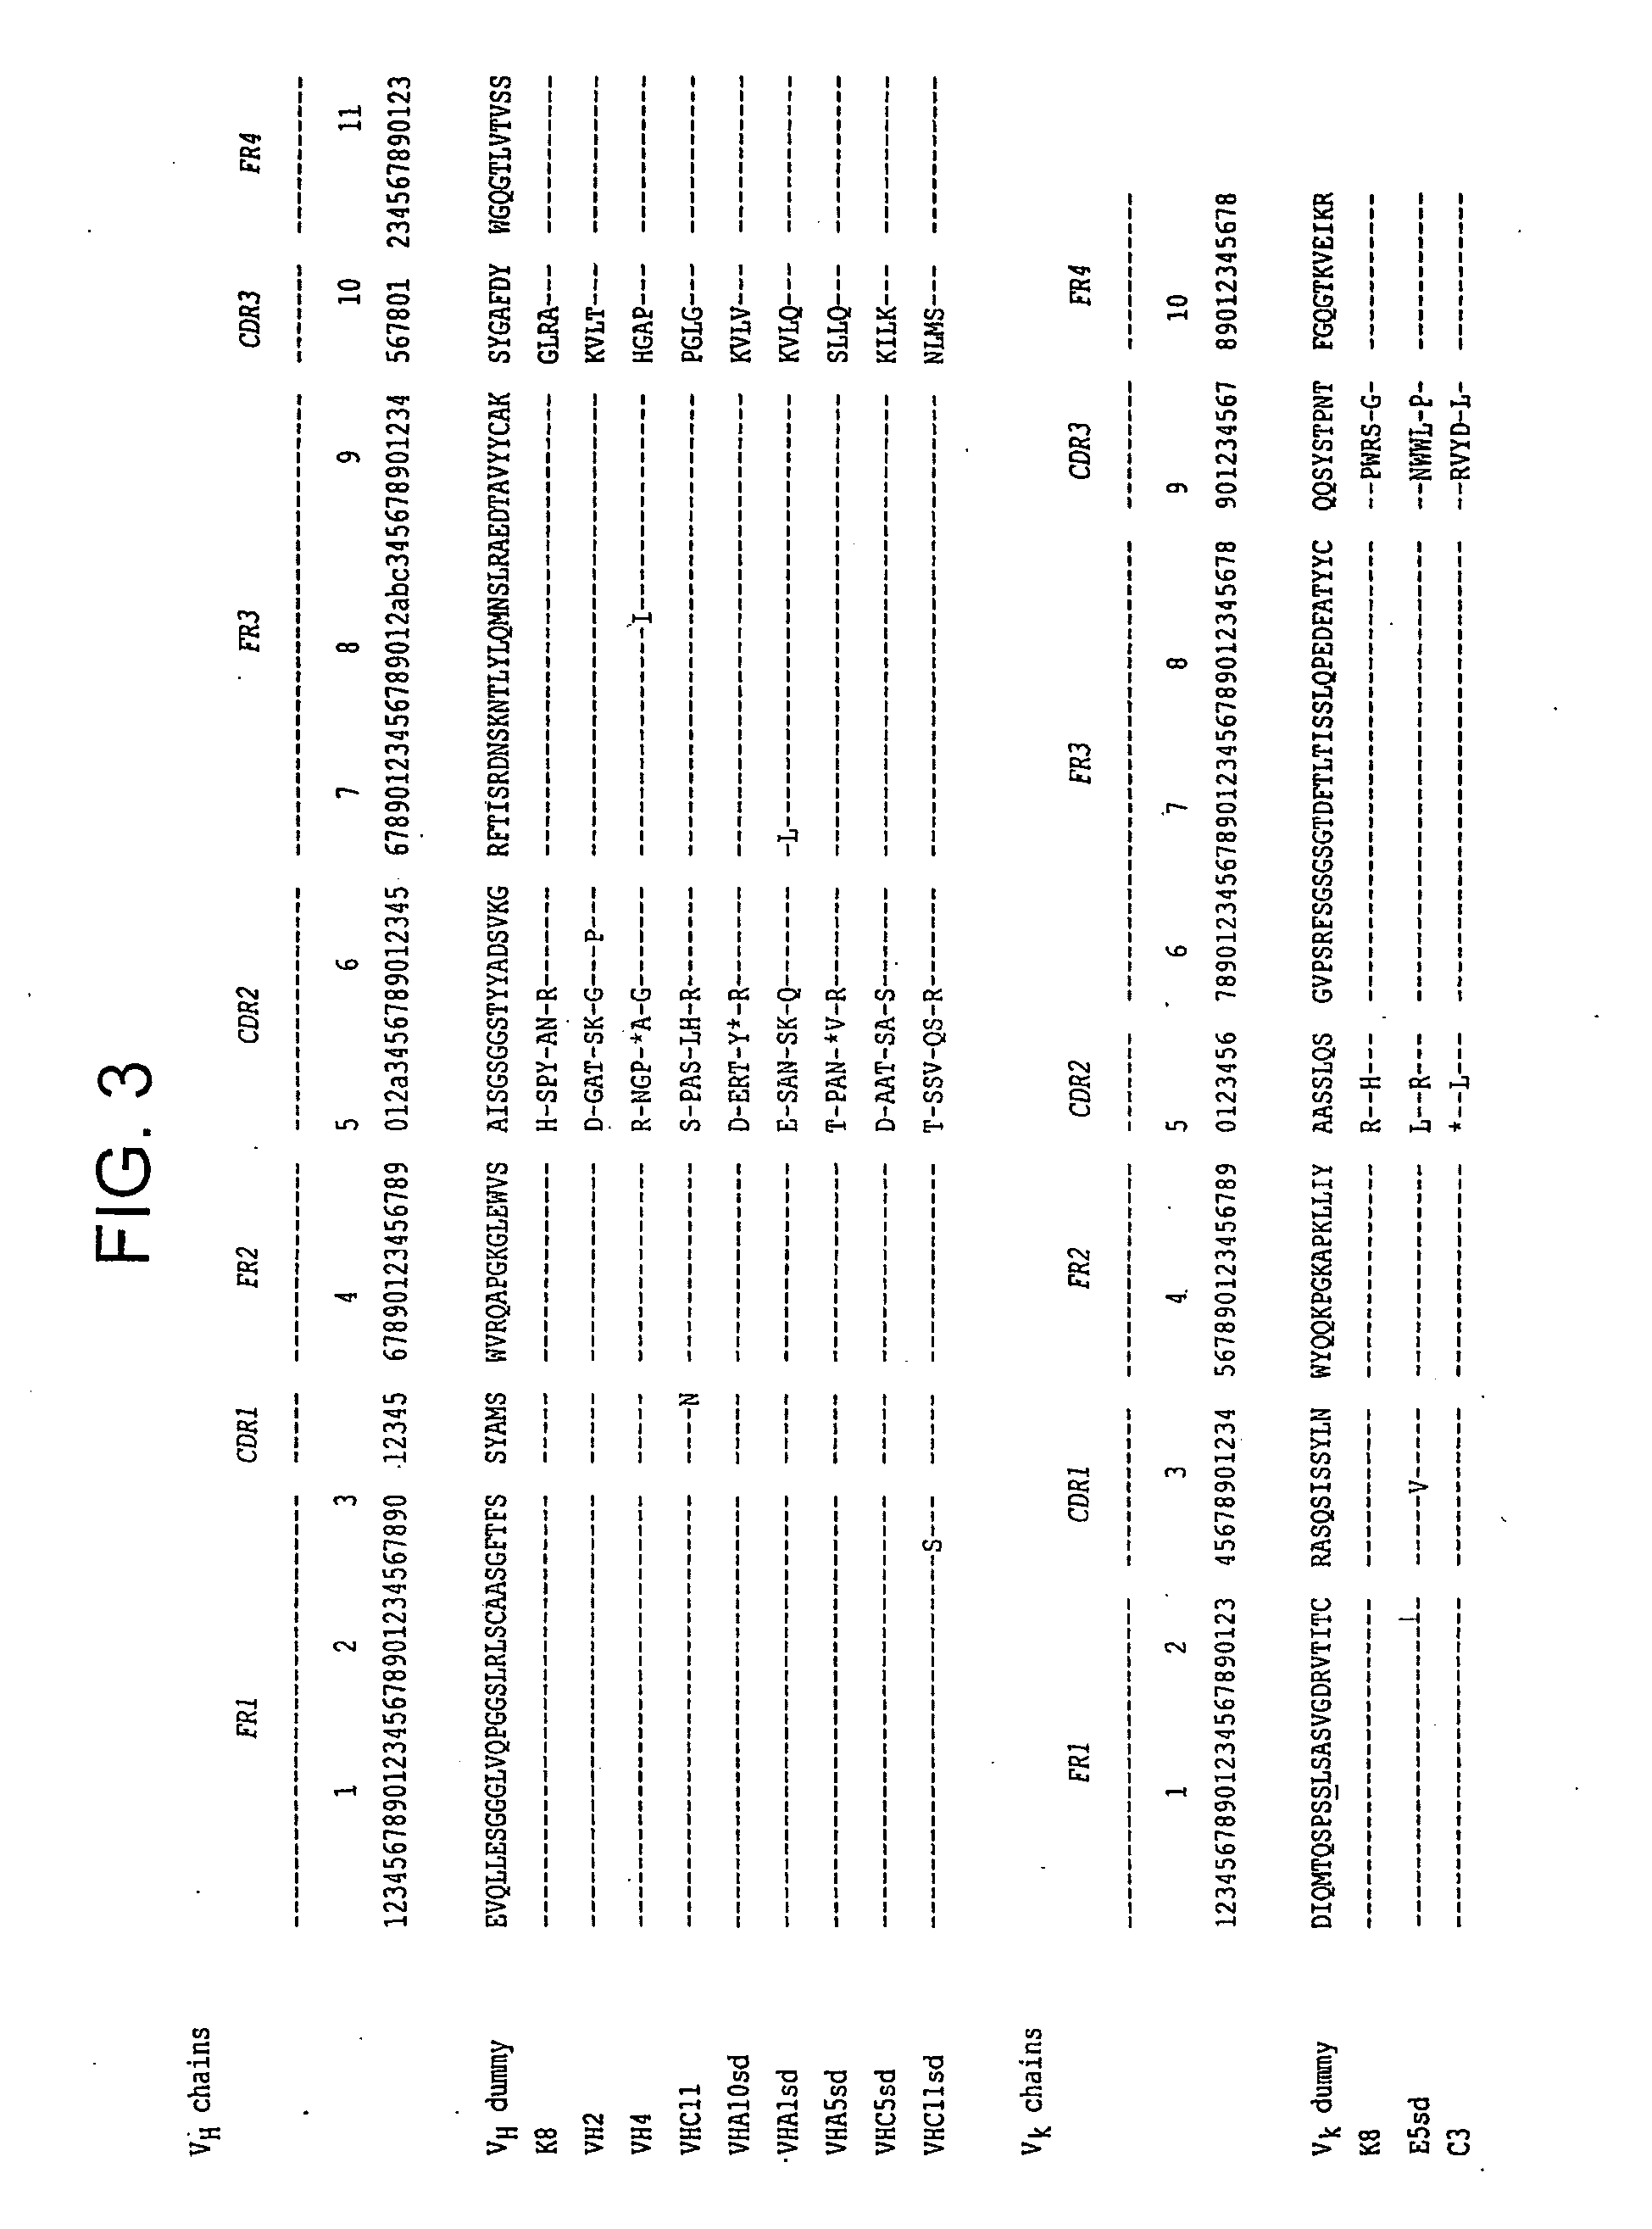 Tumor Necrosis Factor Receptor 1 antagonists and methods of use therefor